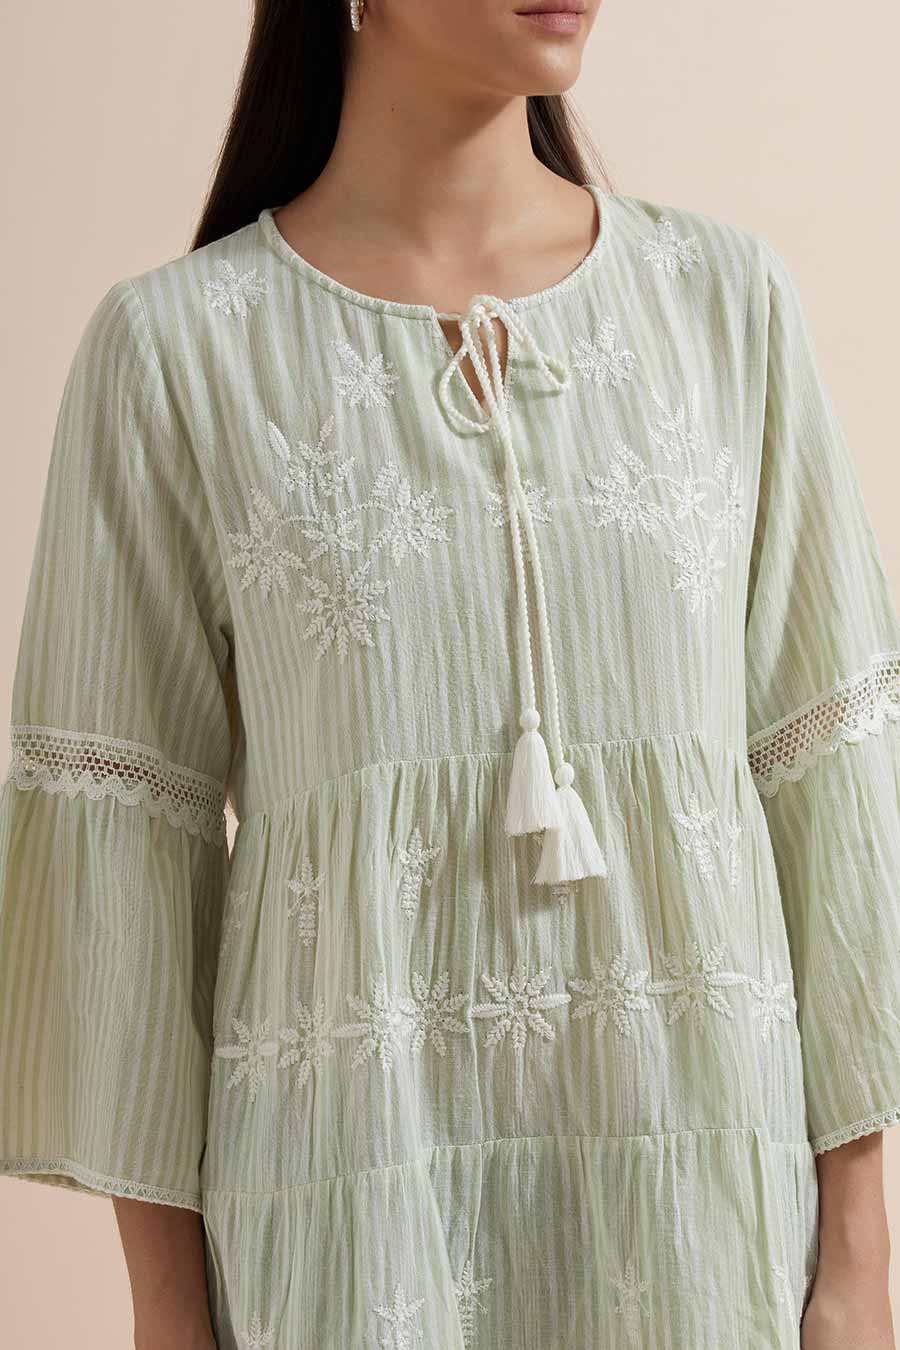 Green Stripe Cotton Embroidered Top